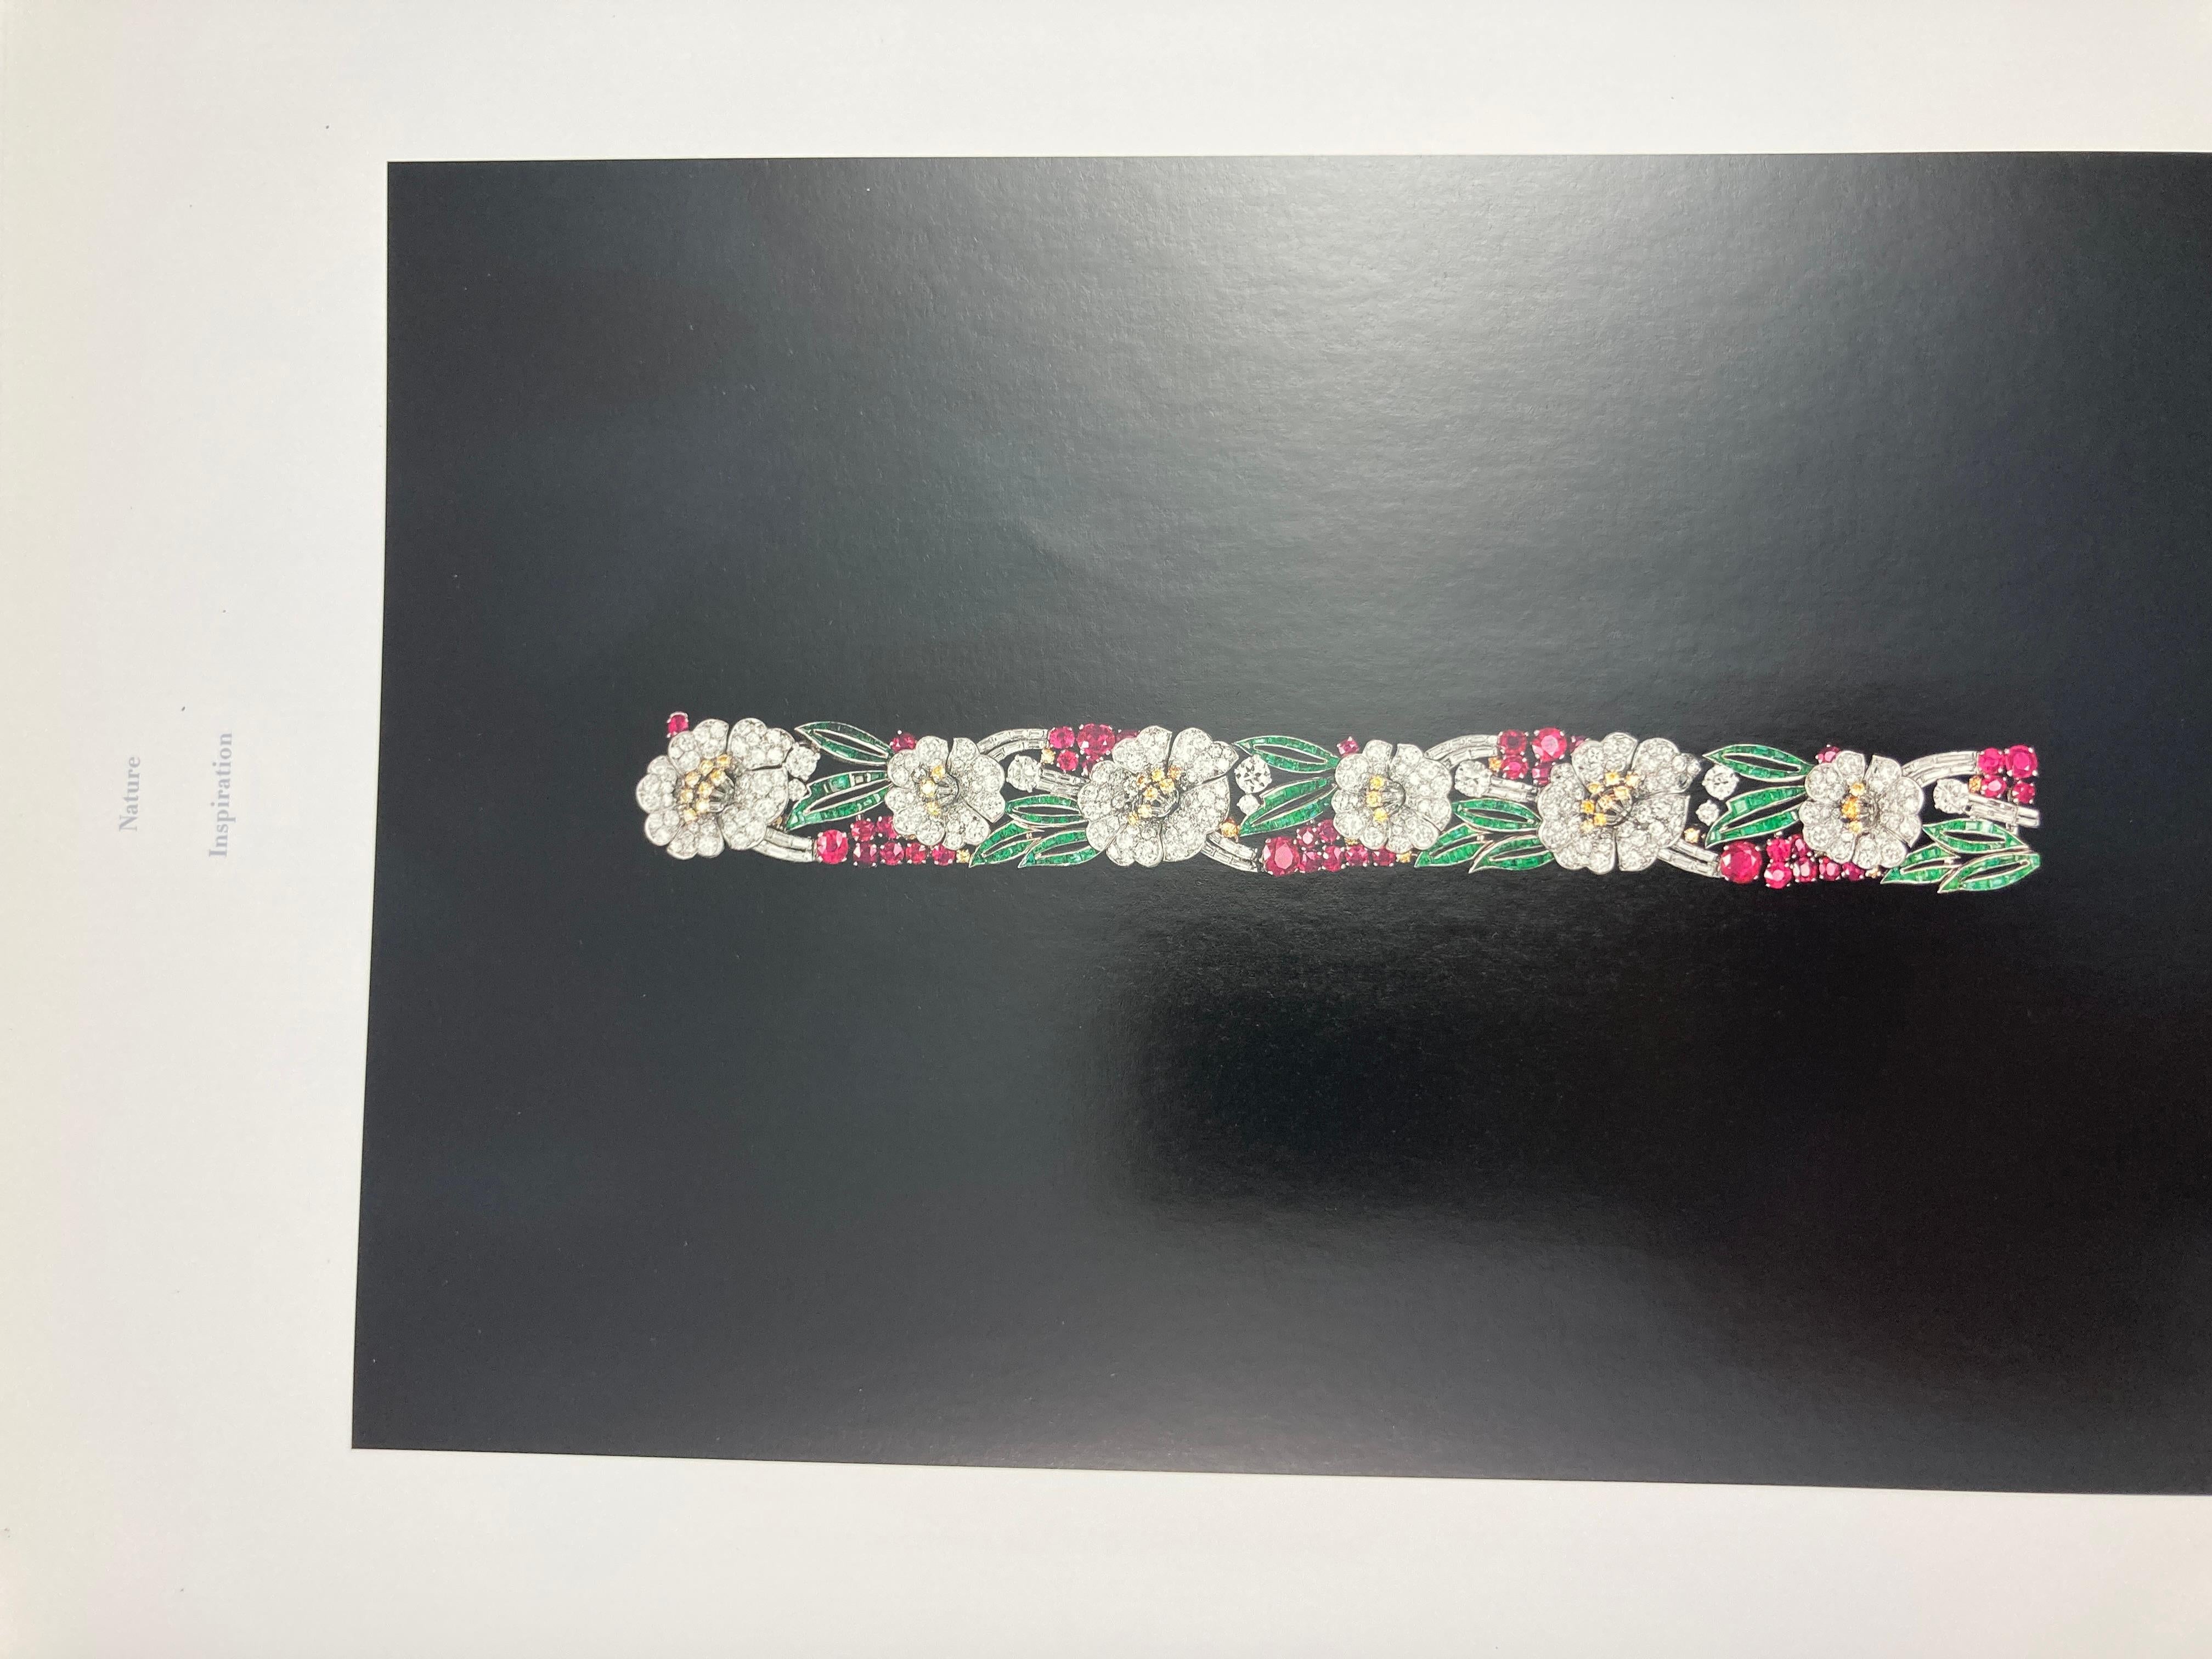 Van Cleef & Arpels: Timeless Beauty Hardcover Book 2012 For Sale 3